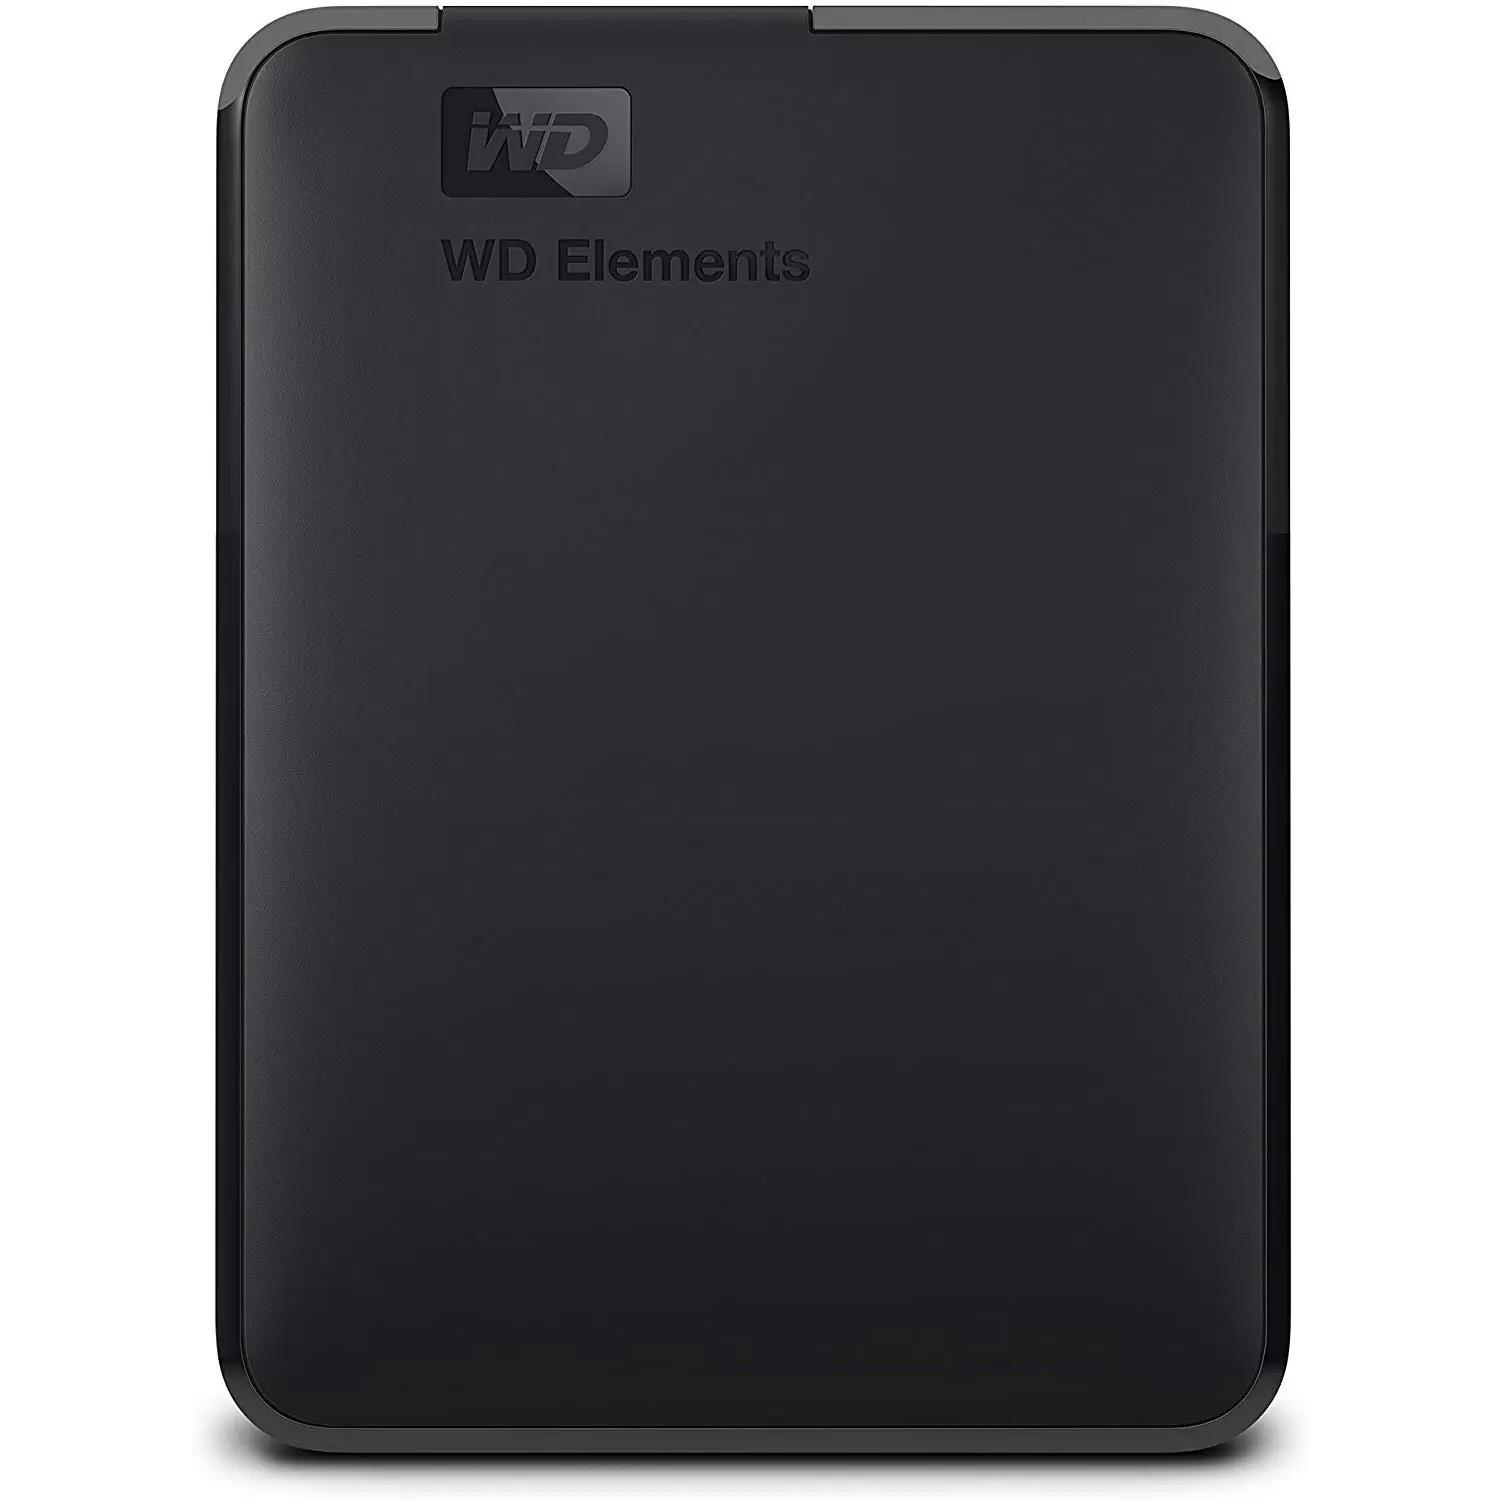 WD 5TB WD Elements USB 3.0 Portable External Hard Drive for $94.99 Shipped